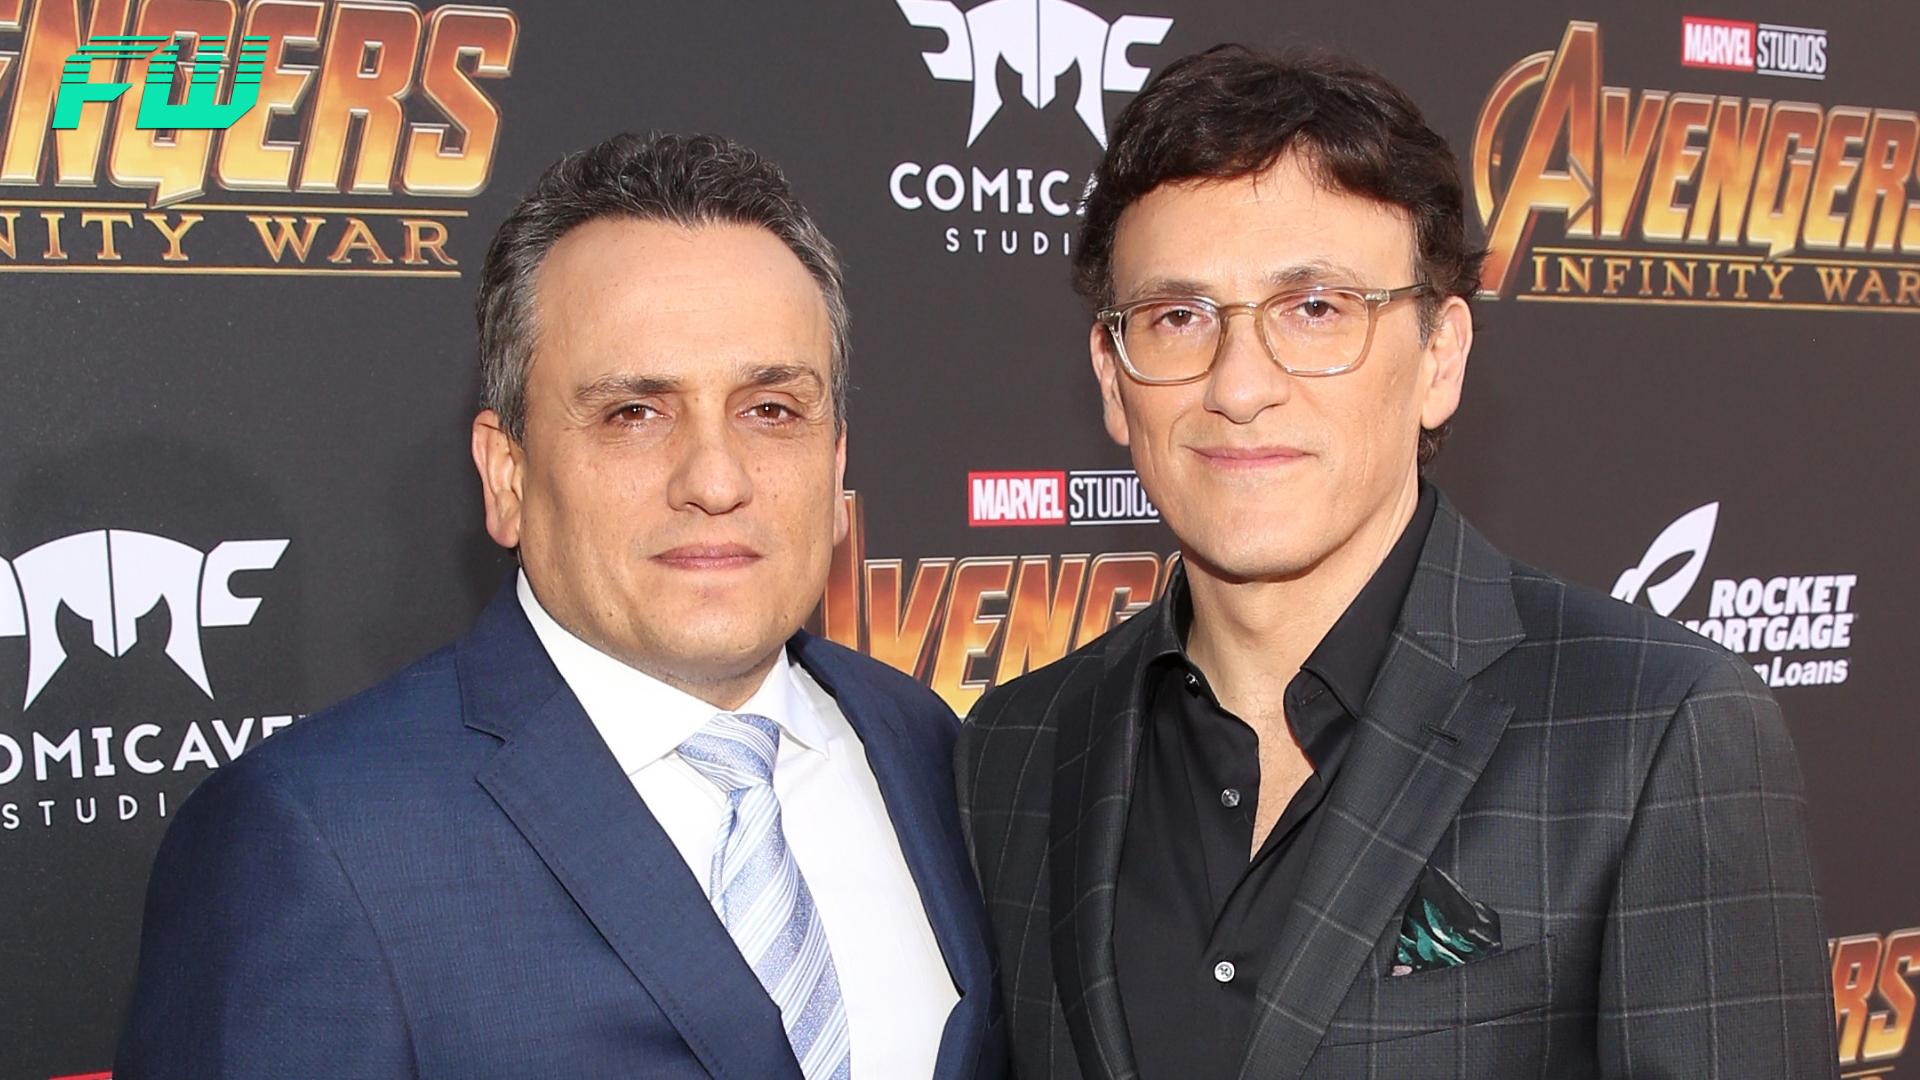 Russo Brothers on their return for another MCU project